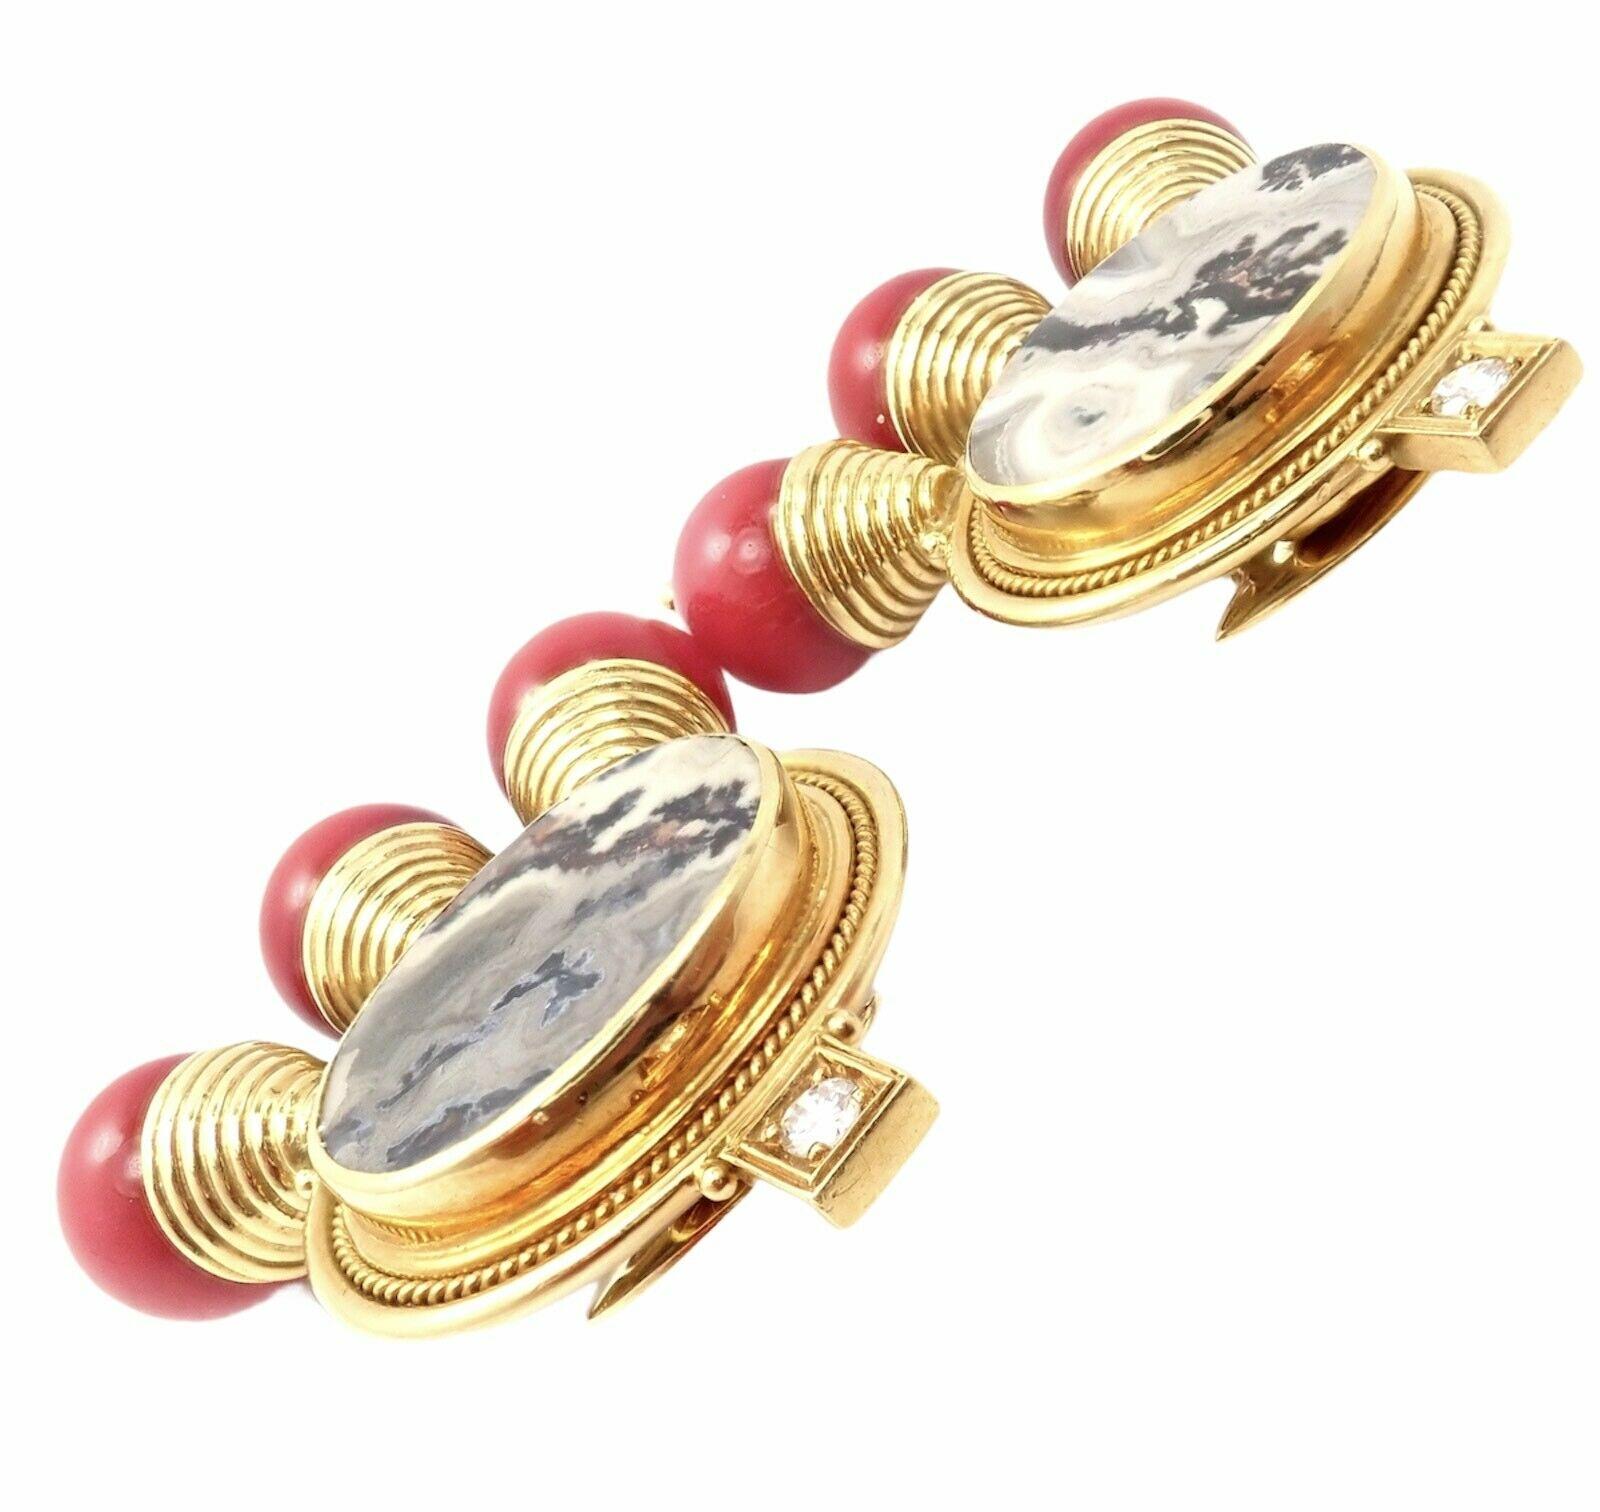 18k Yellow Gold Ebony Wood And Watermelon Tourmaline Earrings by Elizabeth Gage. 
With 2 round brilliant cut diamonds VS1 clarity, G color.
2x Agates: 21mm x 16mm
6x Red Cora Beads 7mm each.
Details:
Measurements: 40mm x 49mm
Weight:  61.4